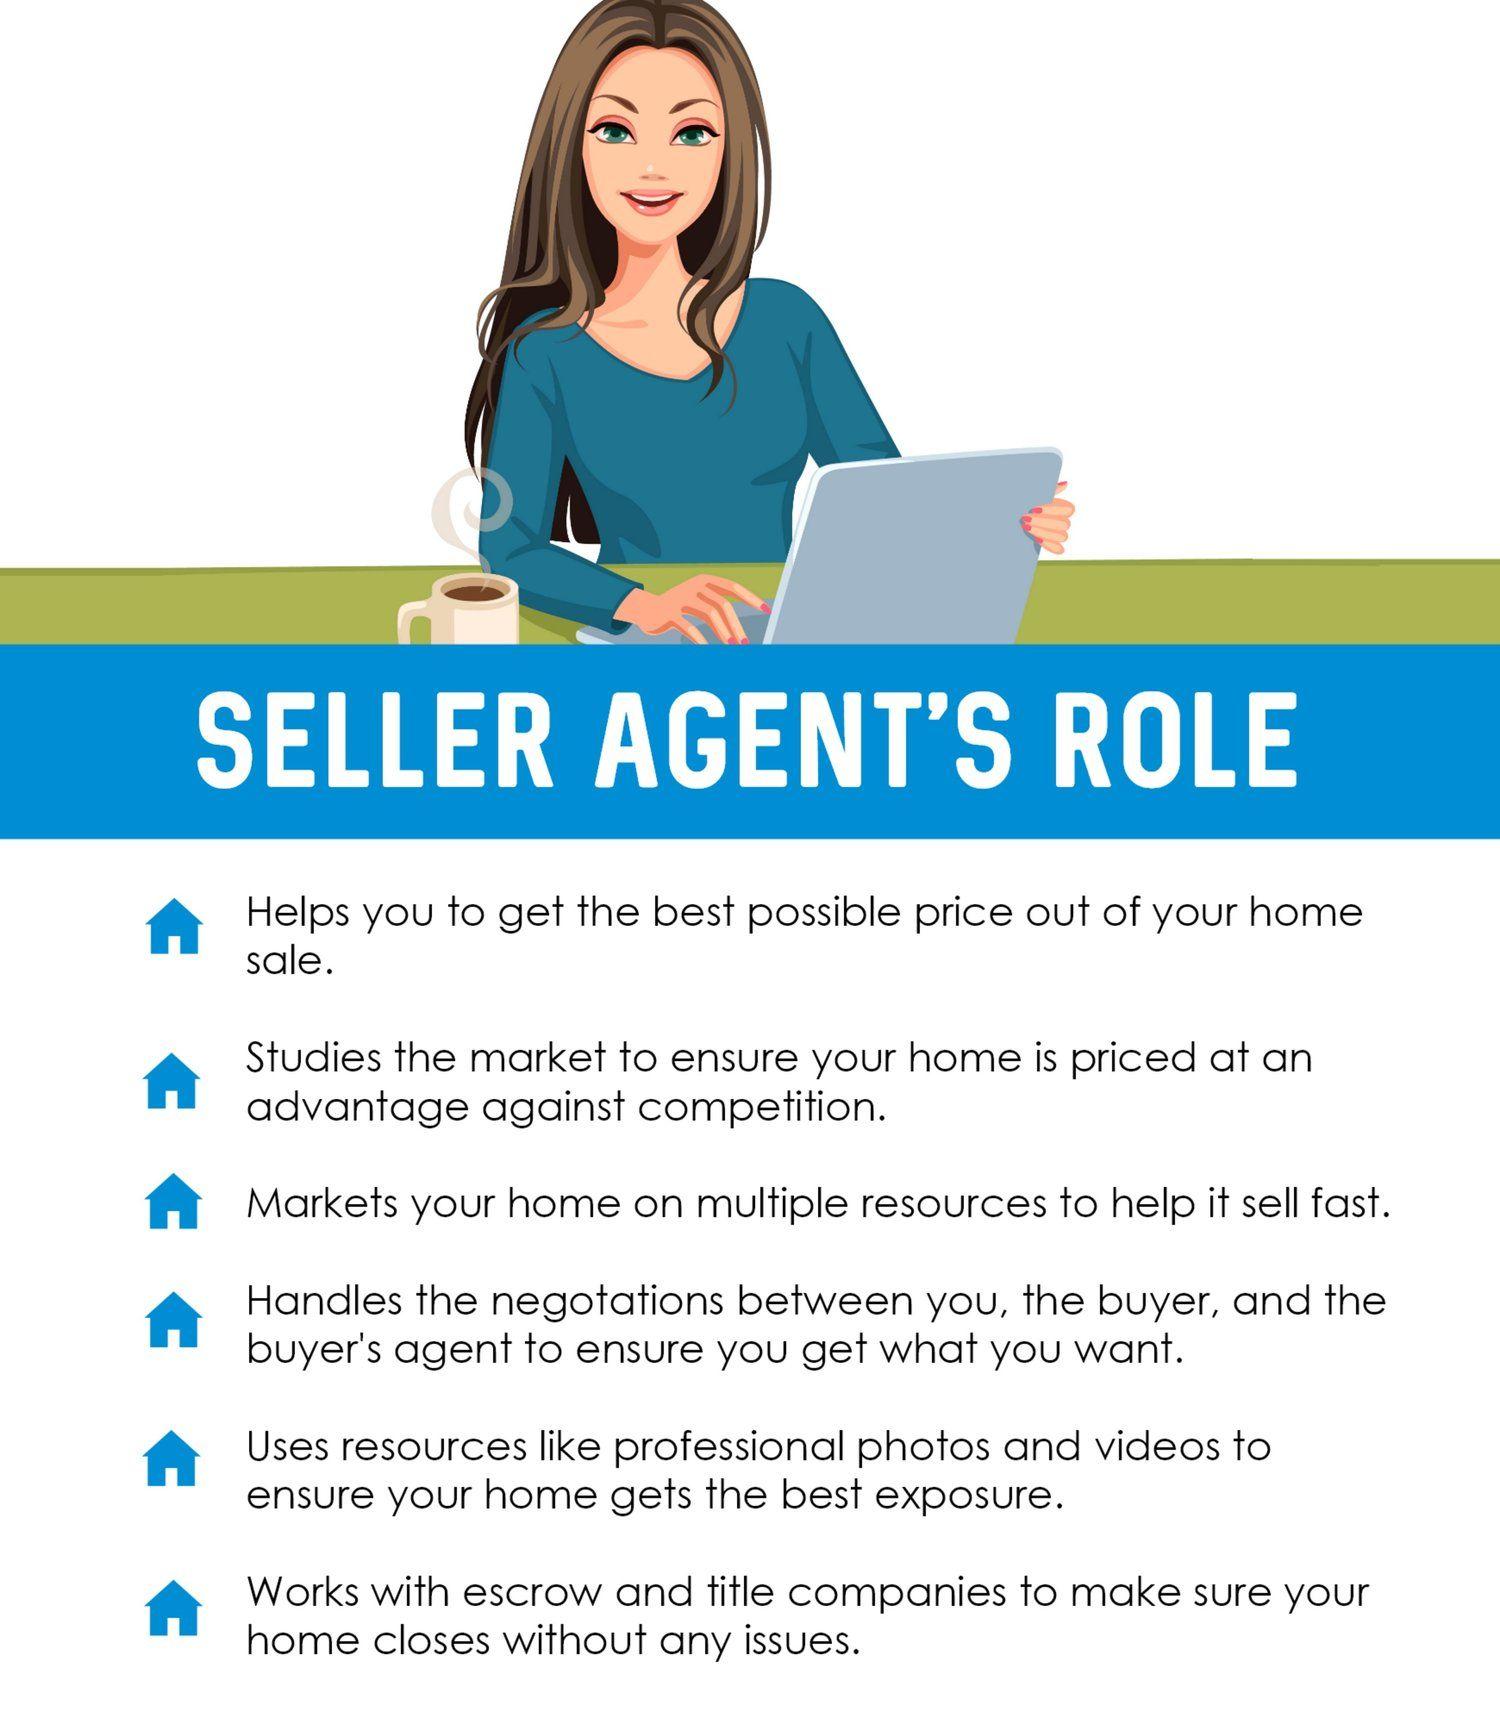 What sellers want in a real estate agent